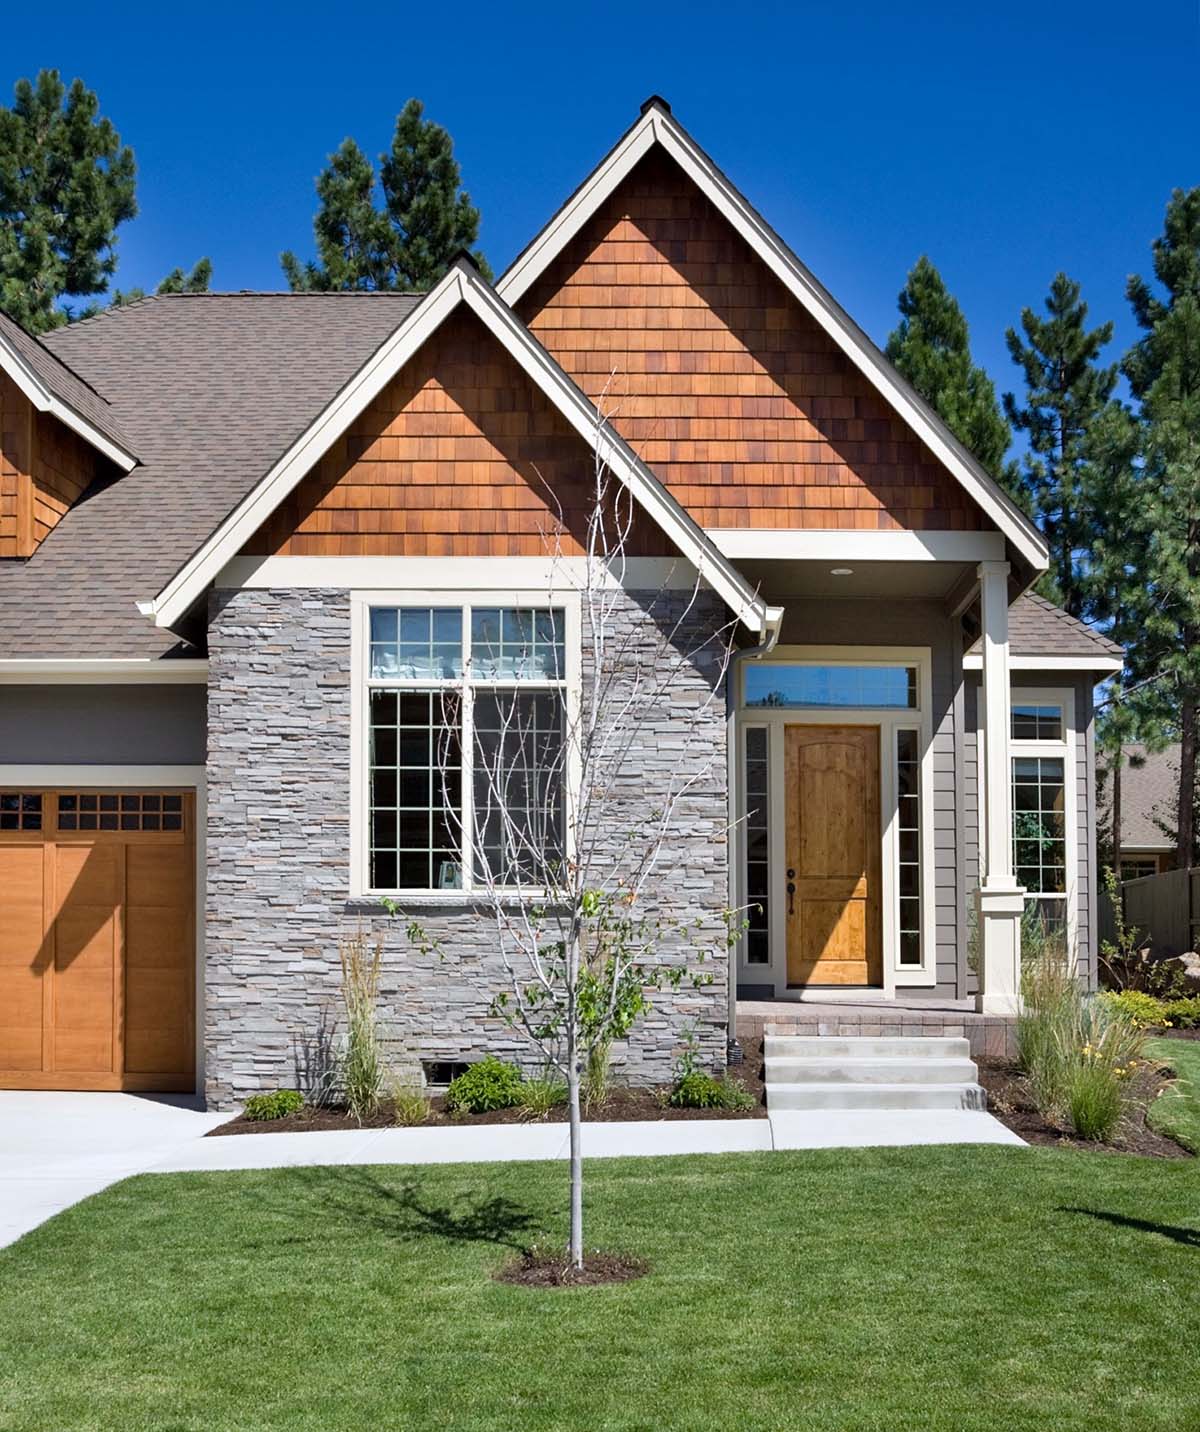 Craftsman, Traditional Plan with 2080 Sq. Ft., 3 Bedrooms, 3 Bathrooms, 2 Car Garage Picture 2